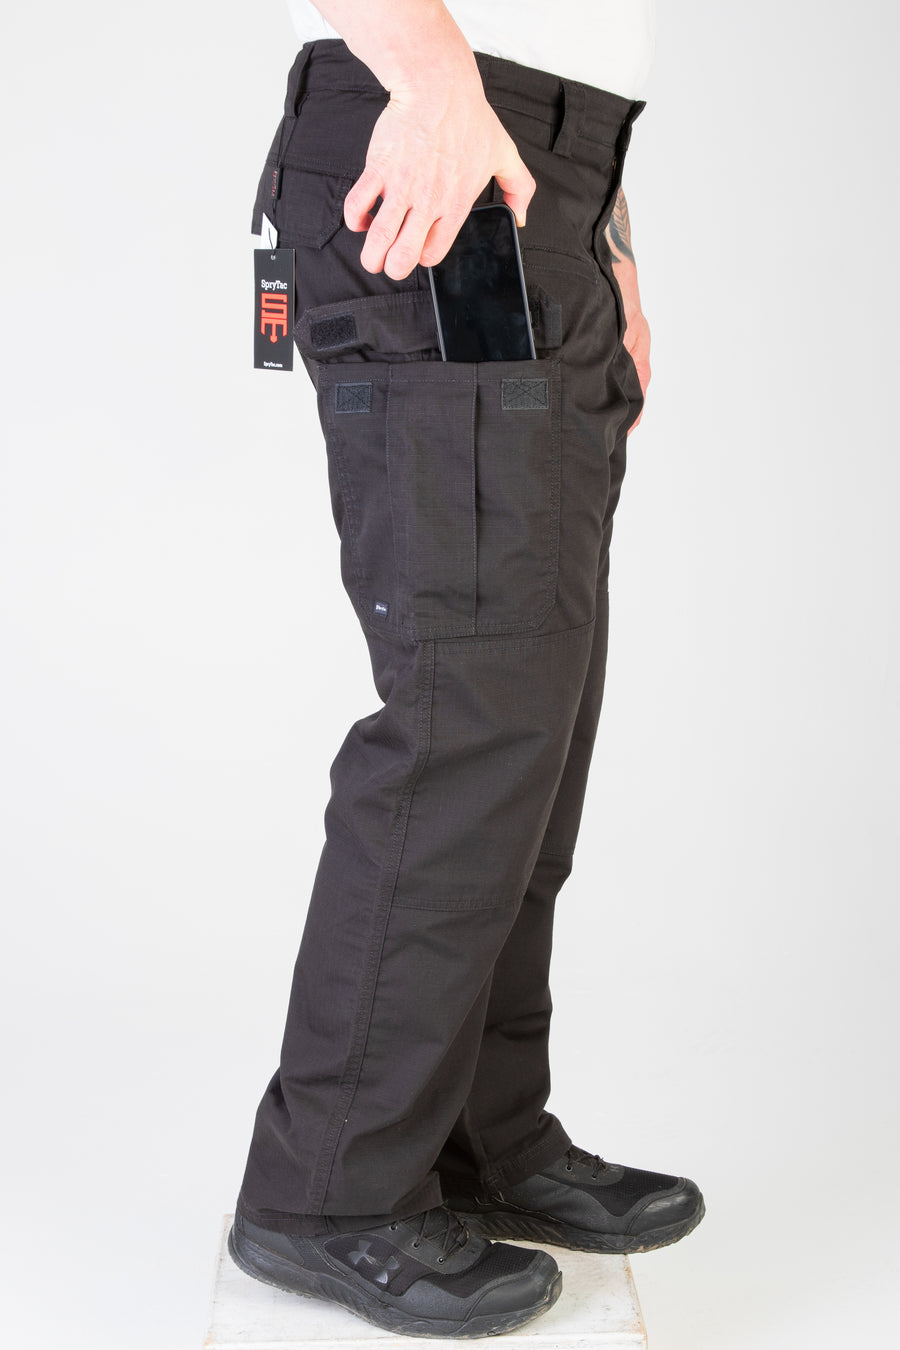 SpryTac Heavy Duty 100% Ripstop Tactical Cargo Pants